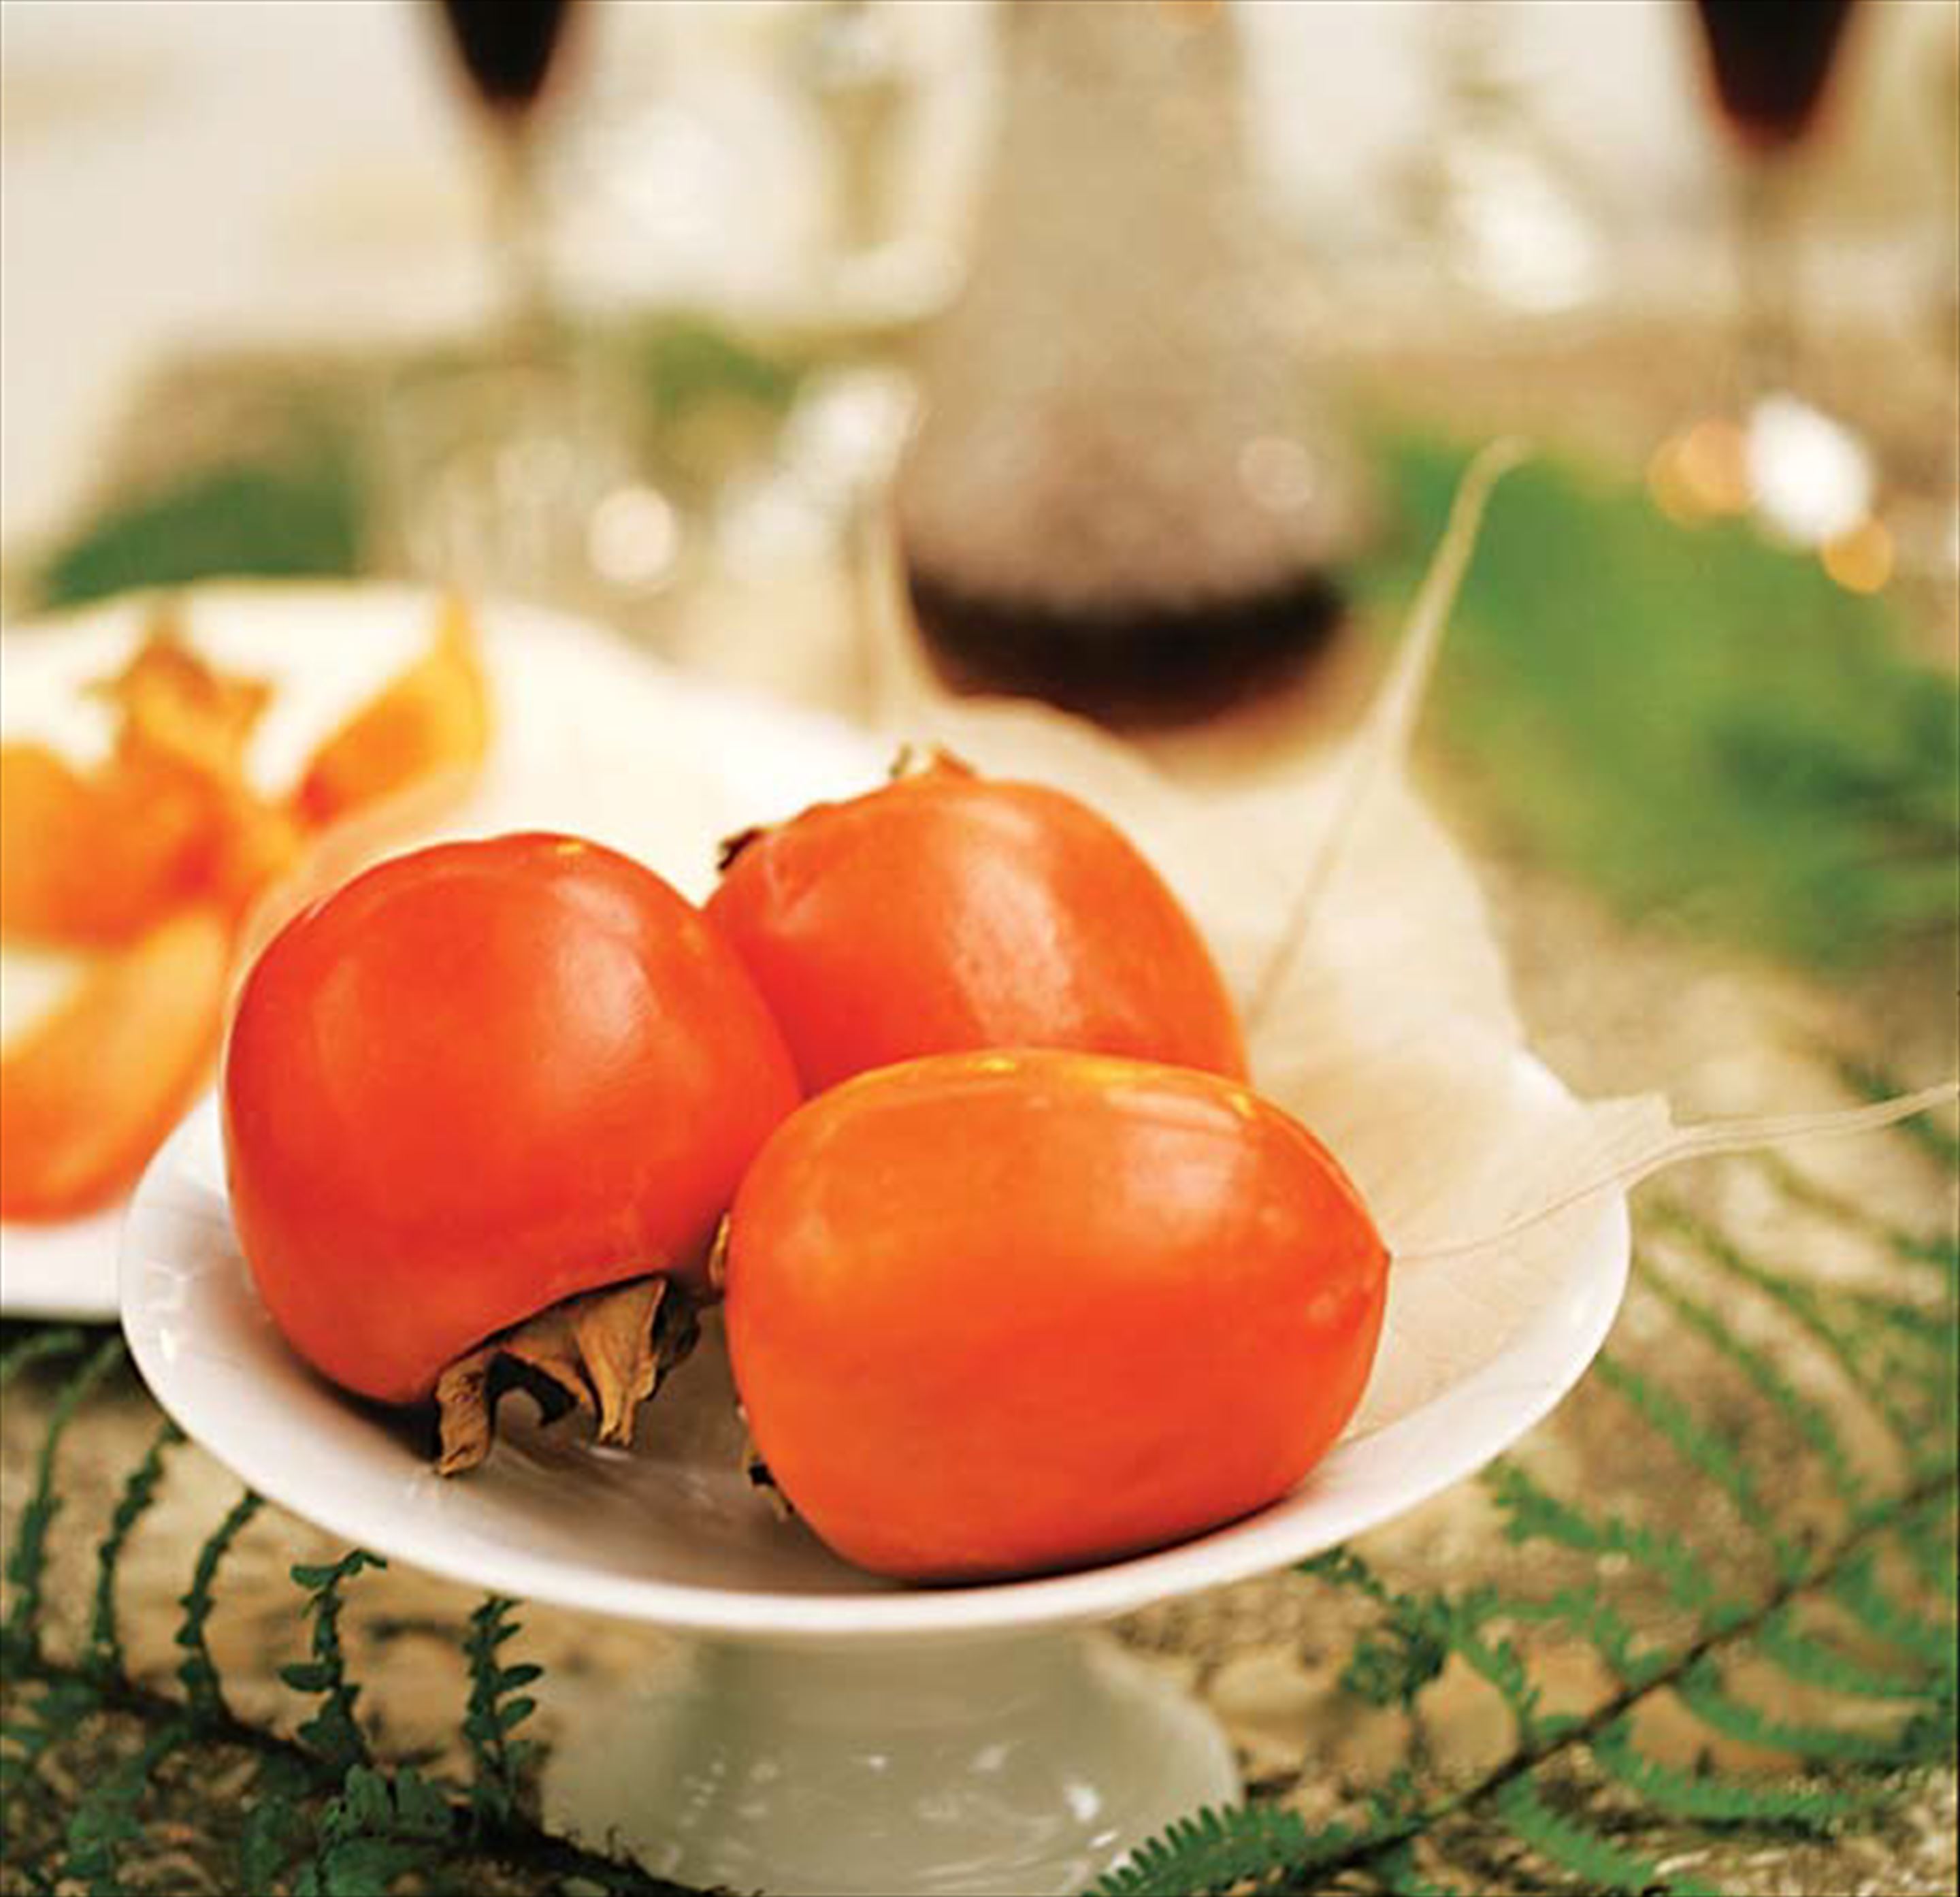 Roasted persimmons